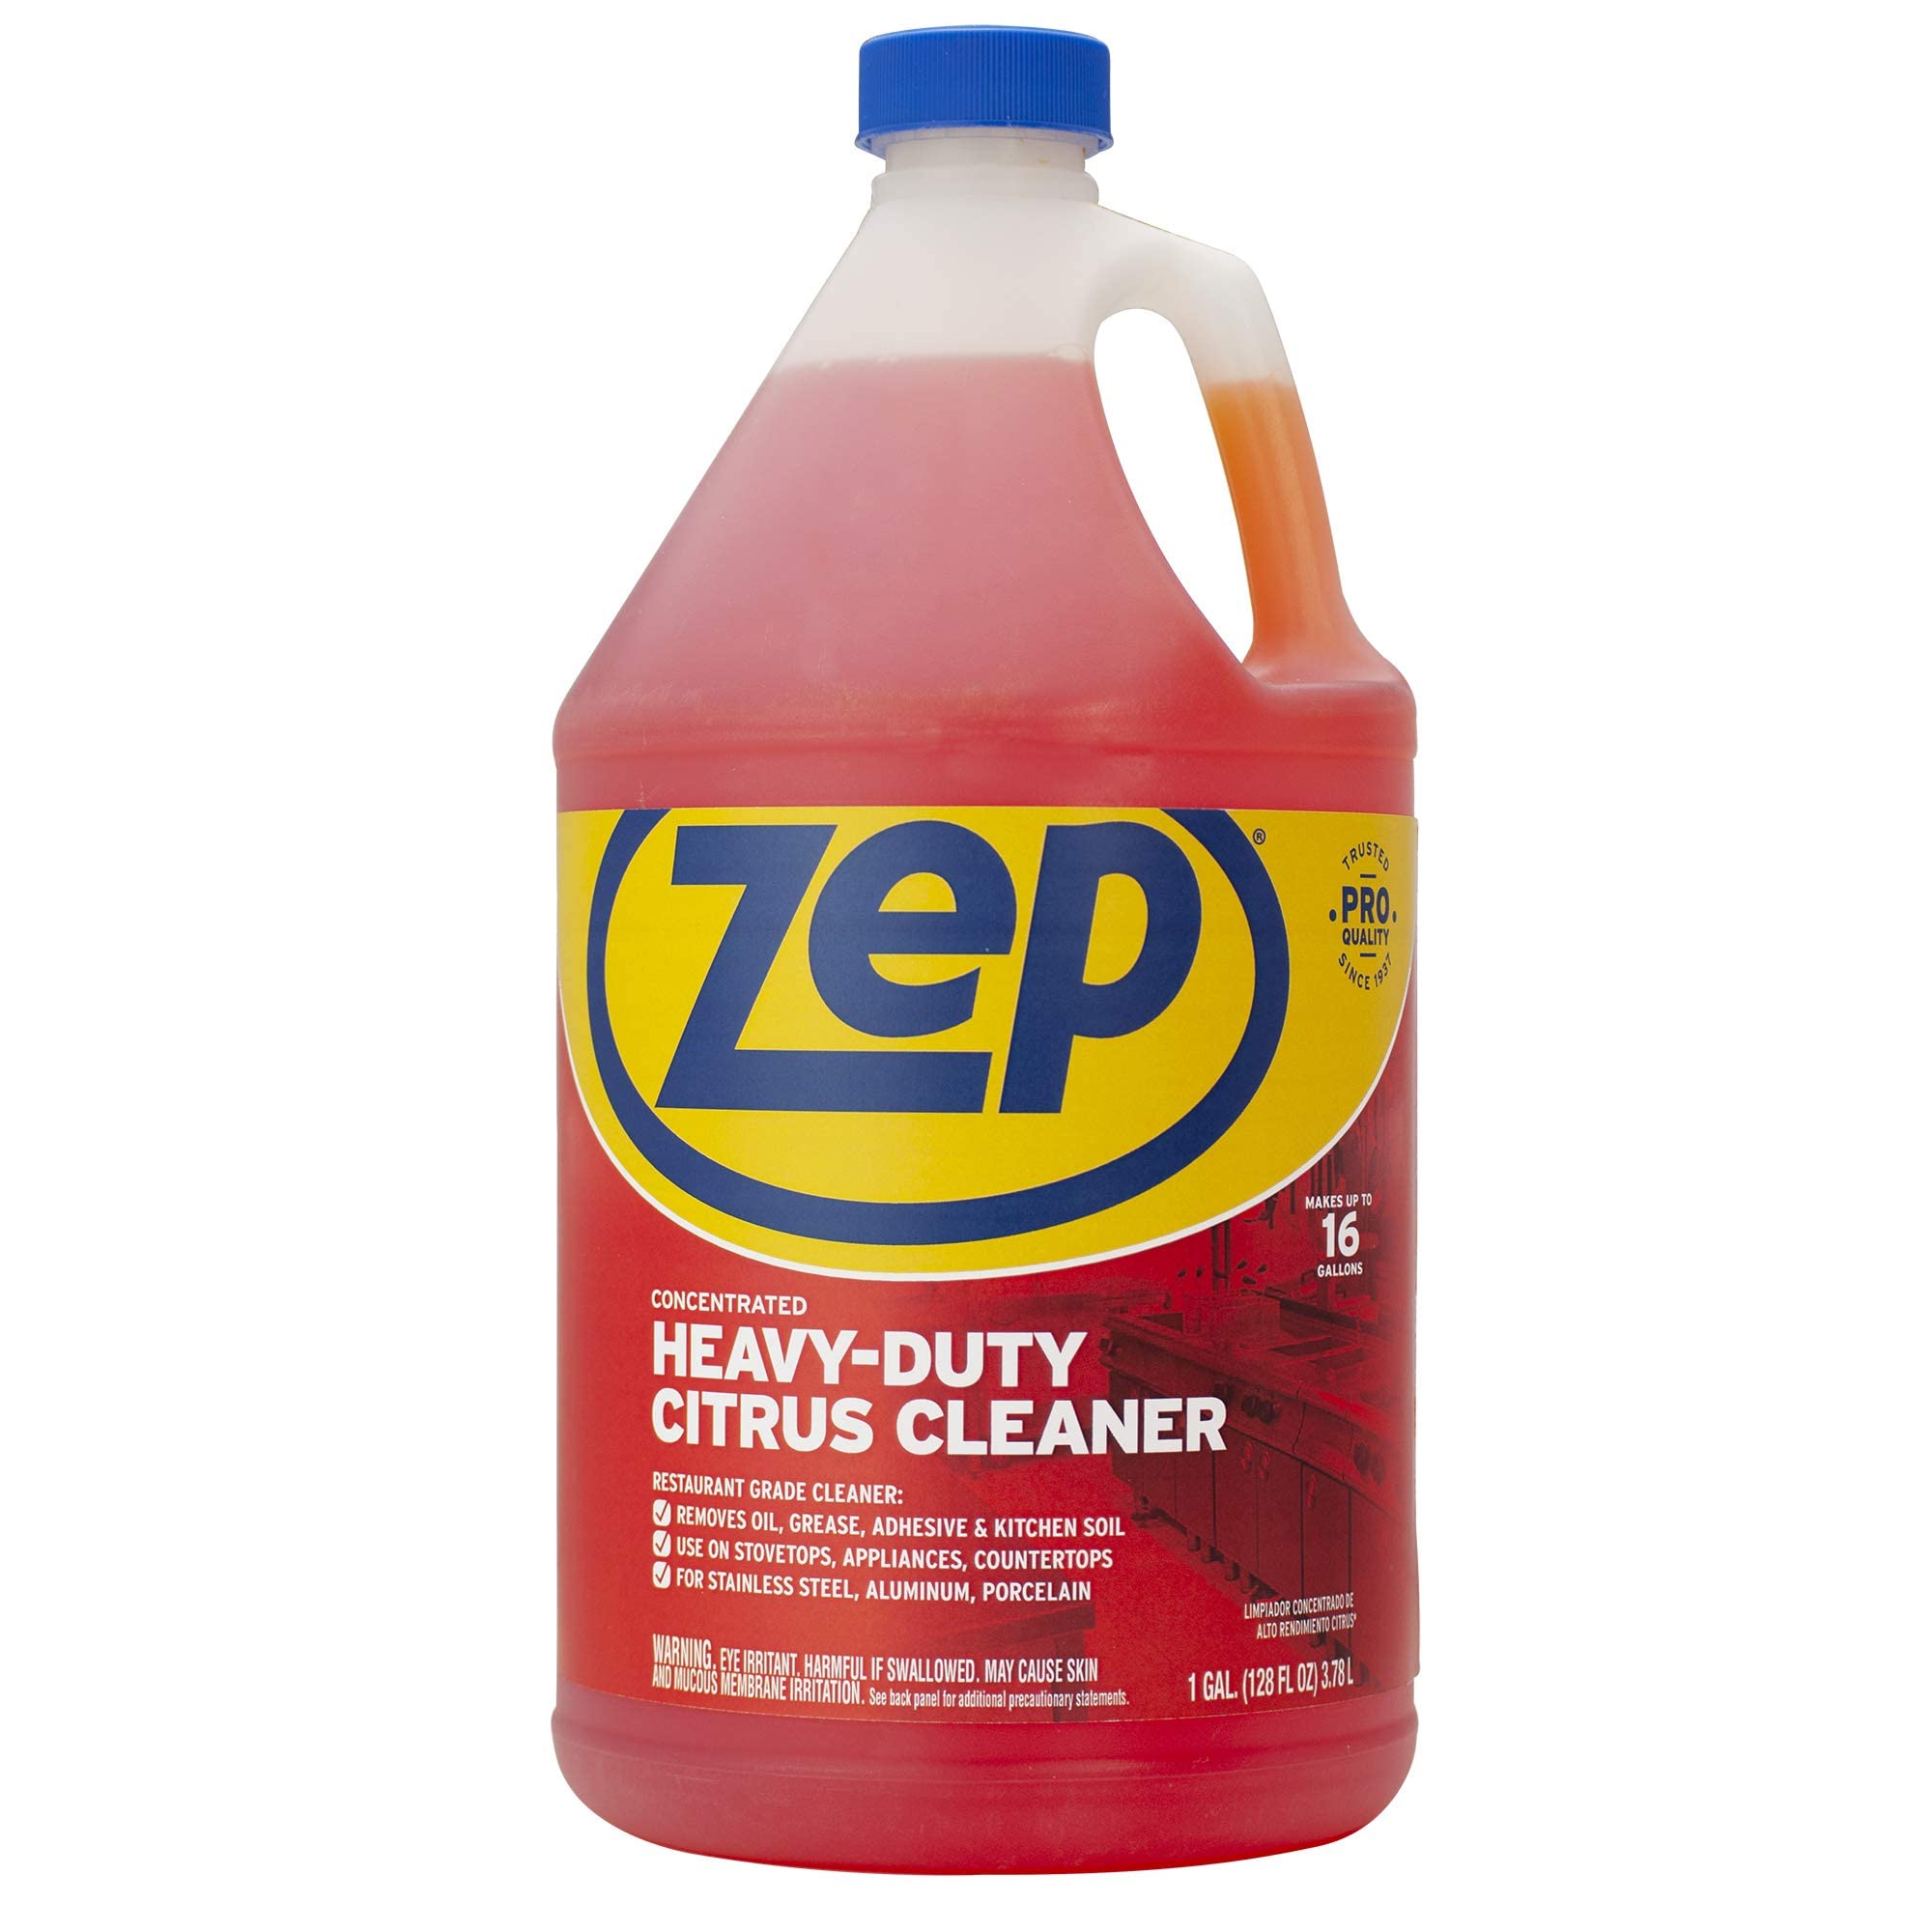 Zep Heavy-Duty Citrus Degreaser Refill - 1 Gallon - ZUCIT128 - Professional Strength Cleaner and Degreaser, Concentrated Pro Formula